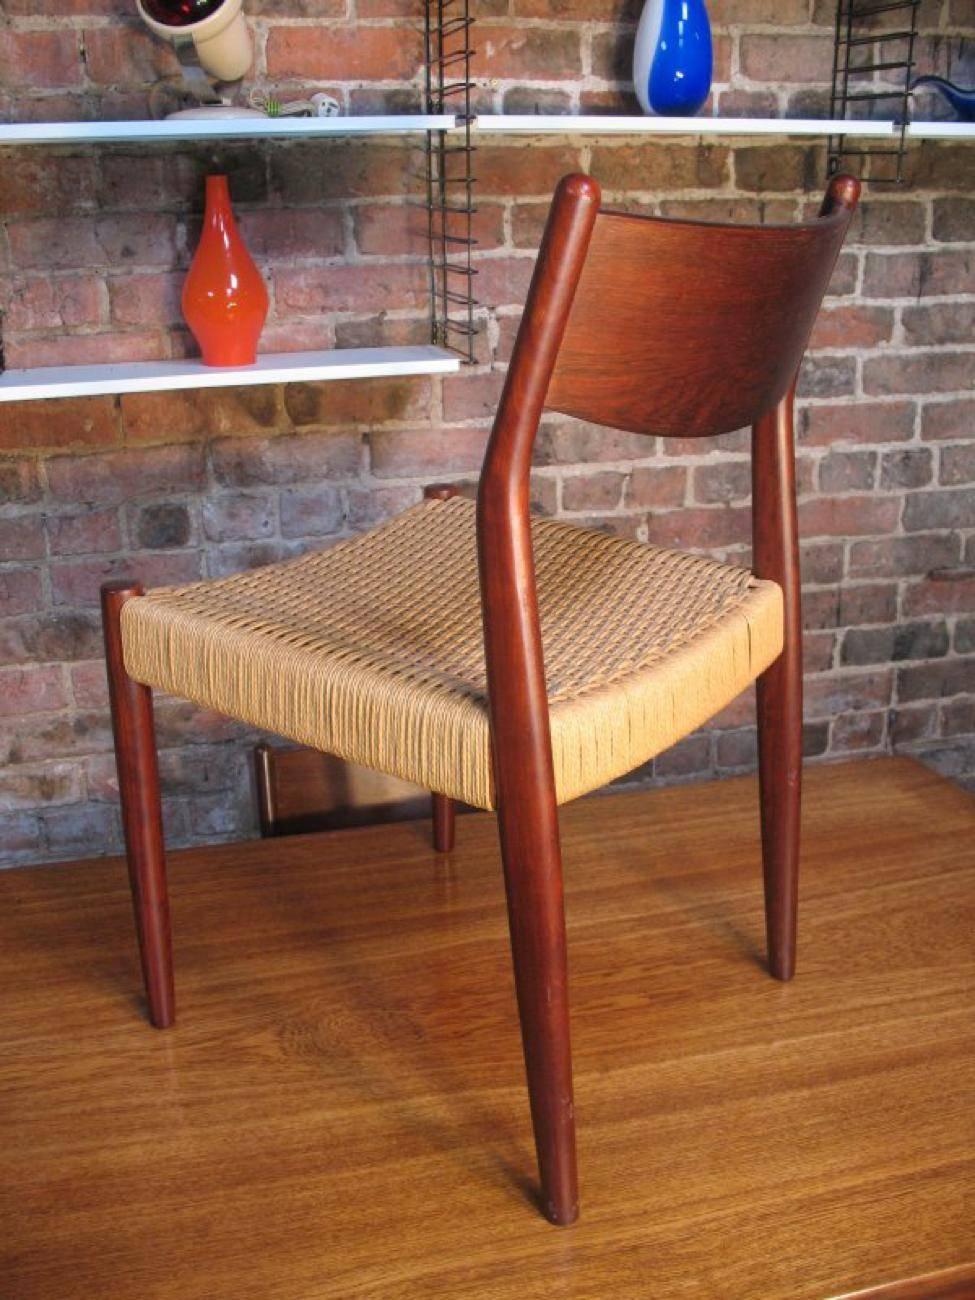 Stunning organic set of rosewood chairs (four) designed and made by Moller, upholstered in a lovely original retro Danish cord which is in very good vintage condition. 

Measures: Height: 79cm, seat height: 45cm, depth: 55cm, width: 48cm.

